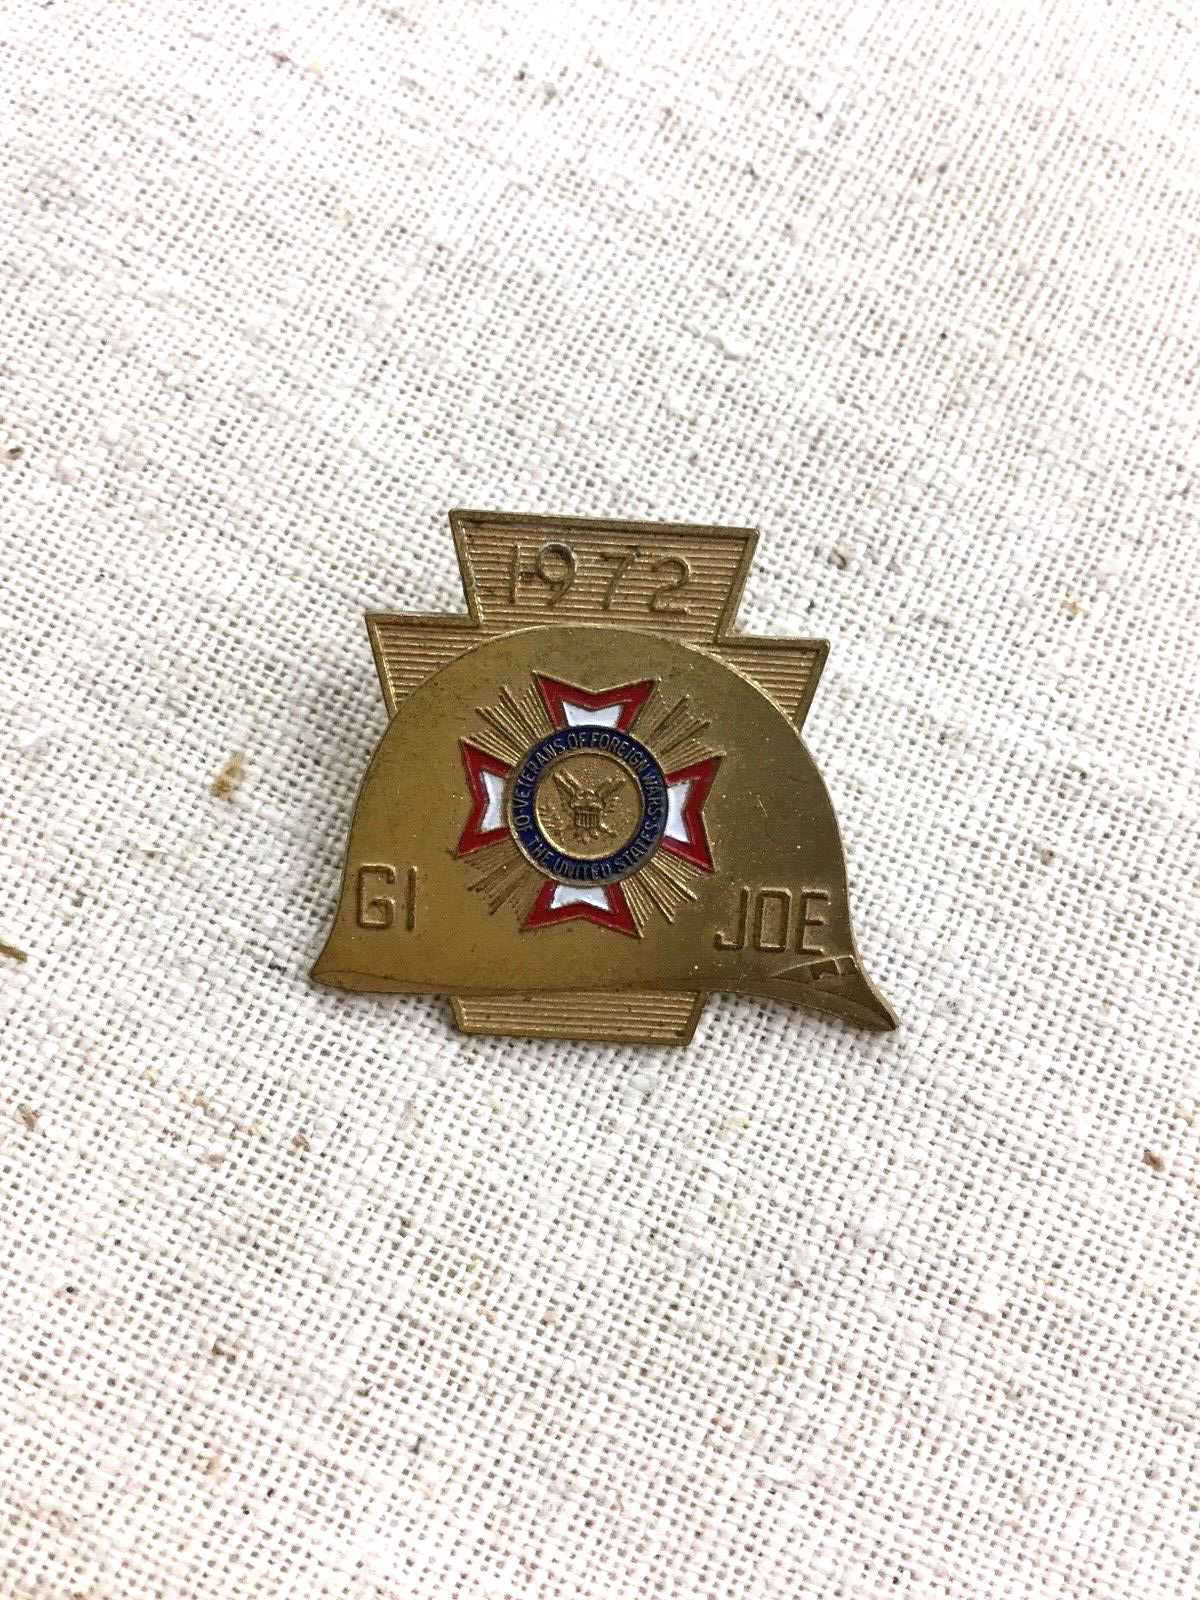 1972 Gi Joe - The 30 Veterans of Foreign Wars - United States - Pin Brooch (M24)